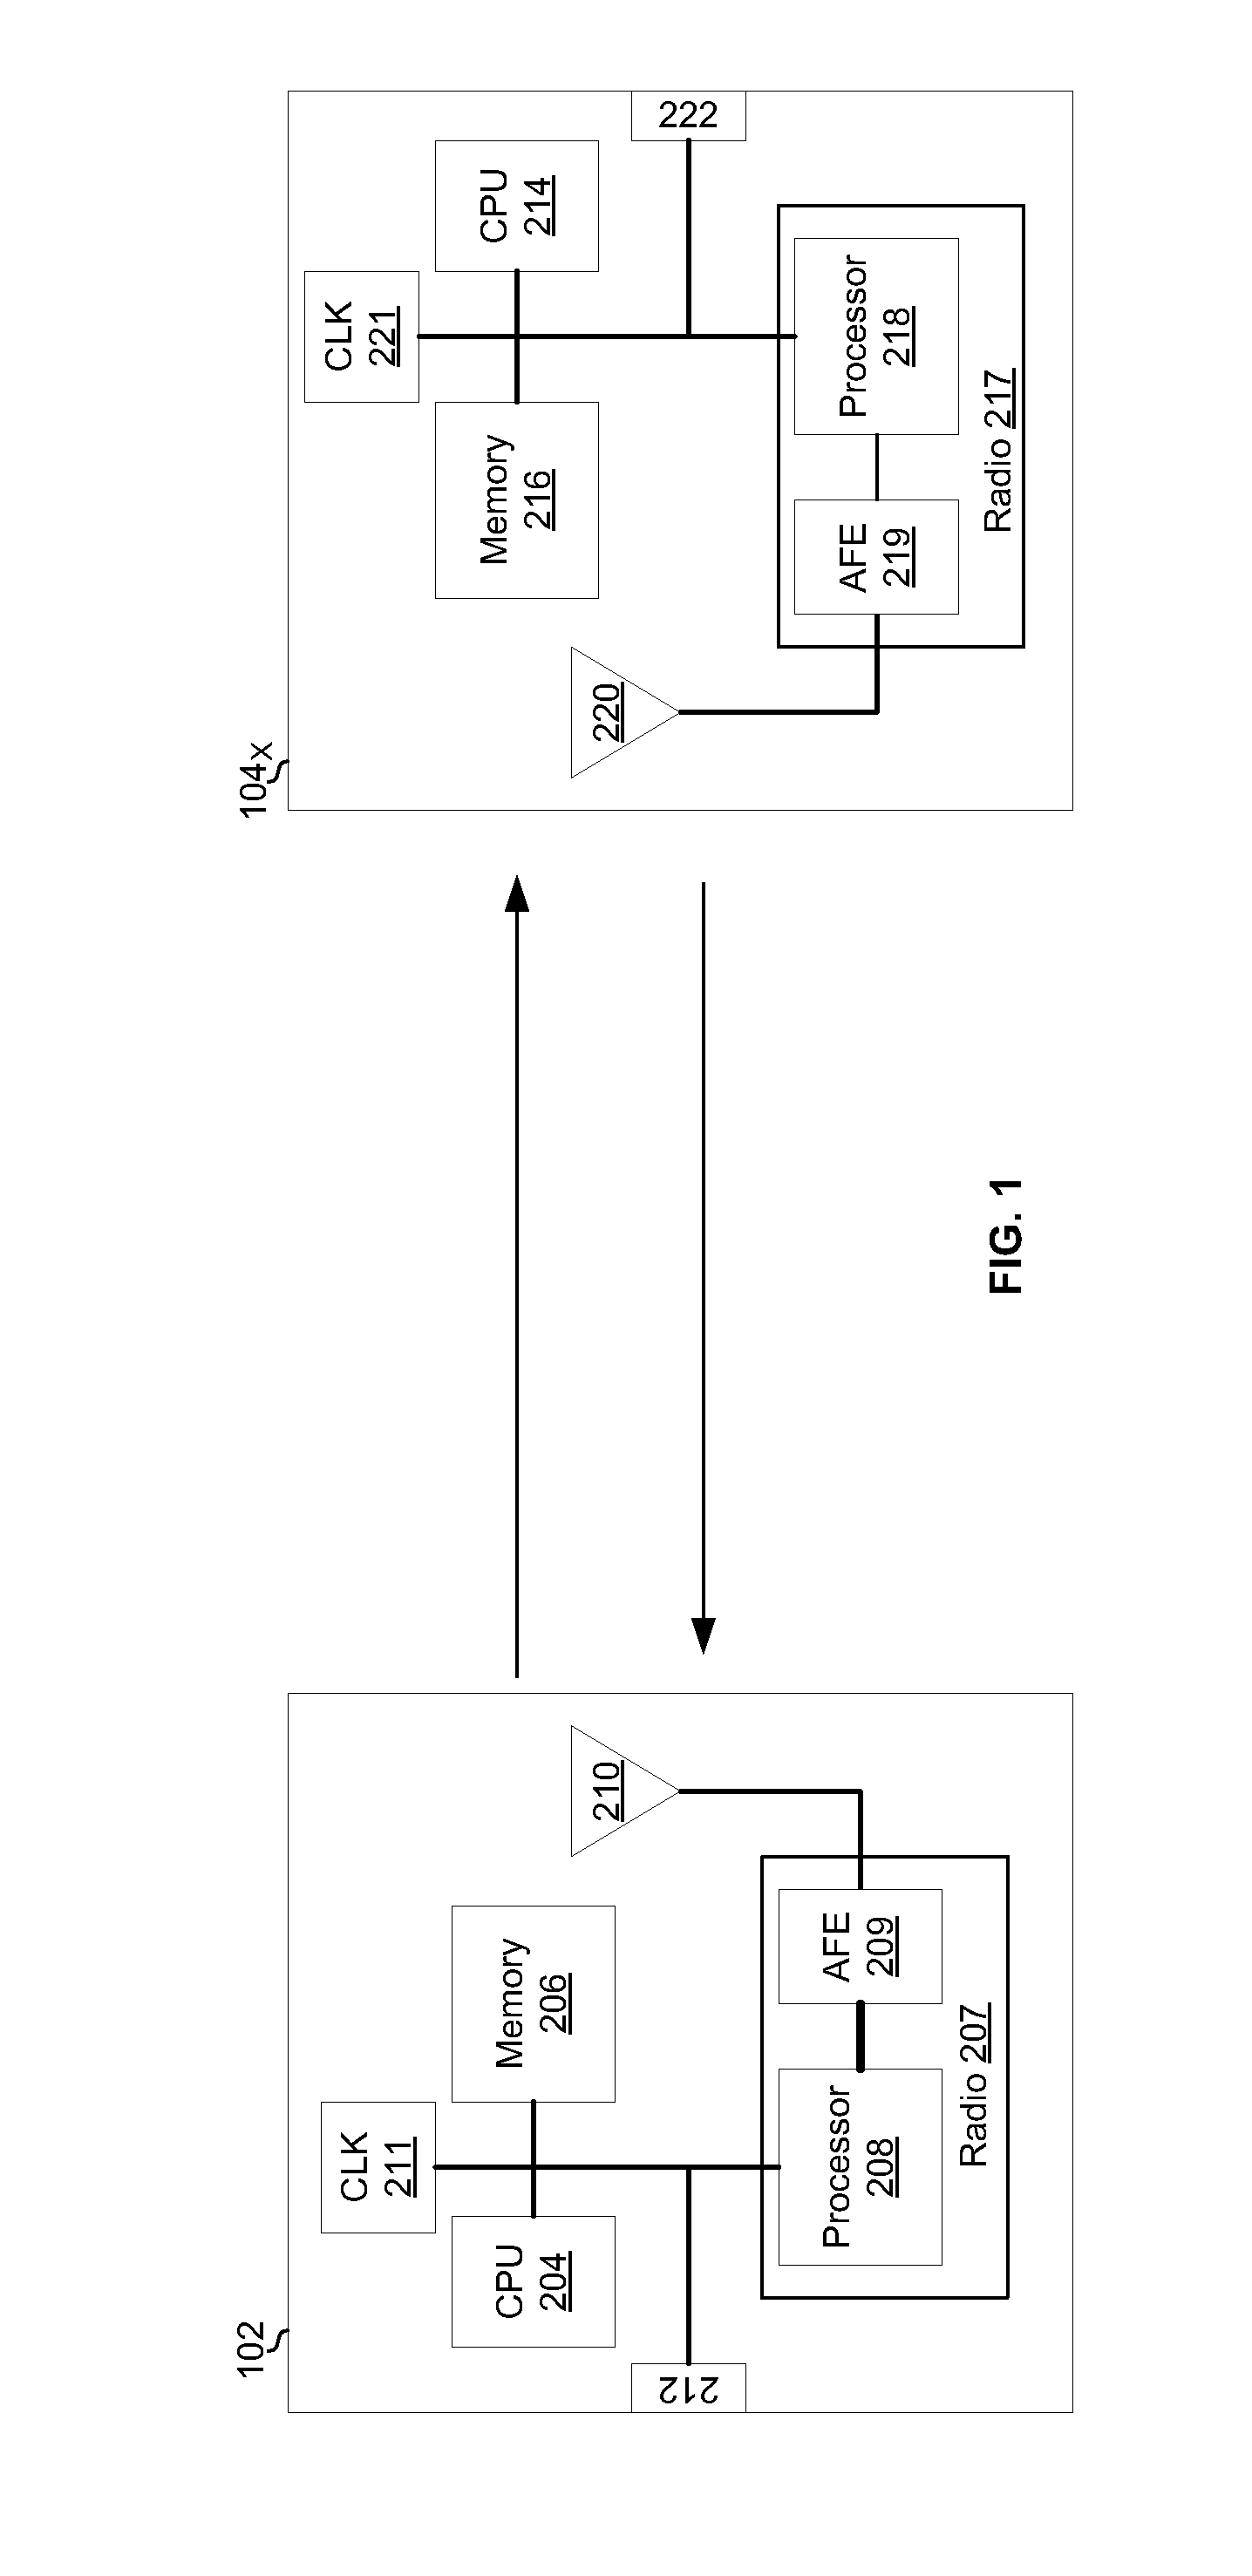 Method and apparatus for dynamic media access control in a multiple access system